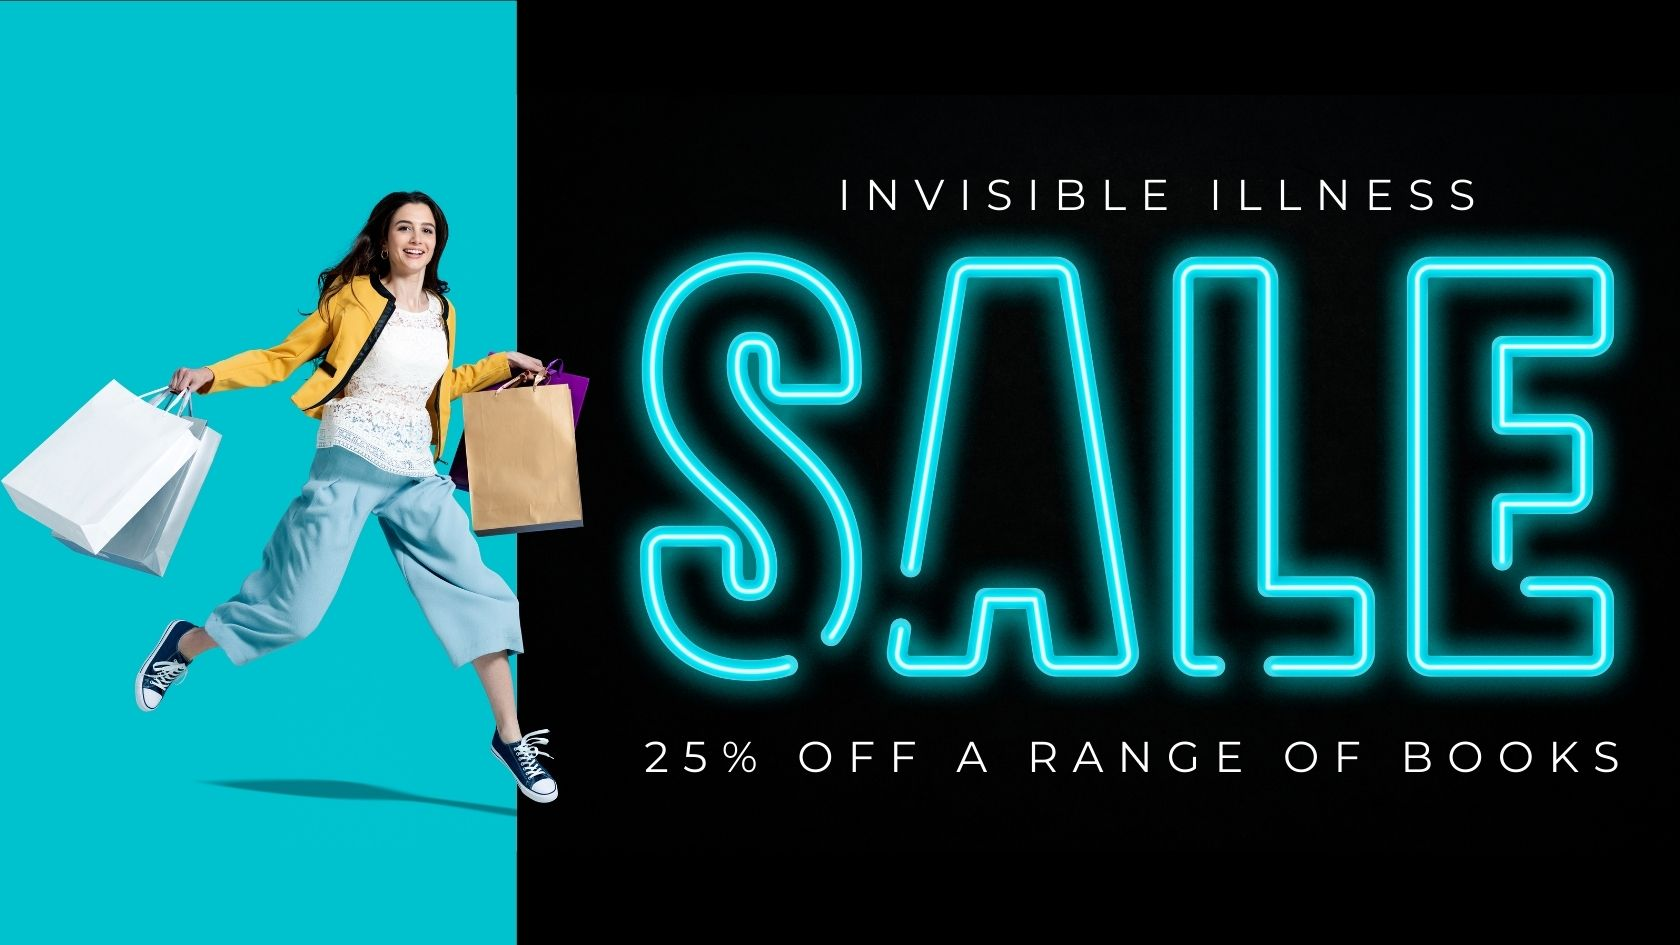 Enjoy 25% off a range of books for our invisible illness sale!